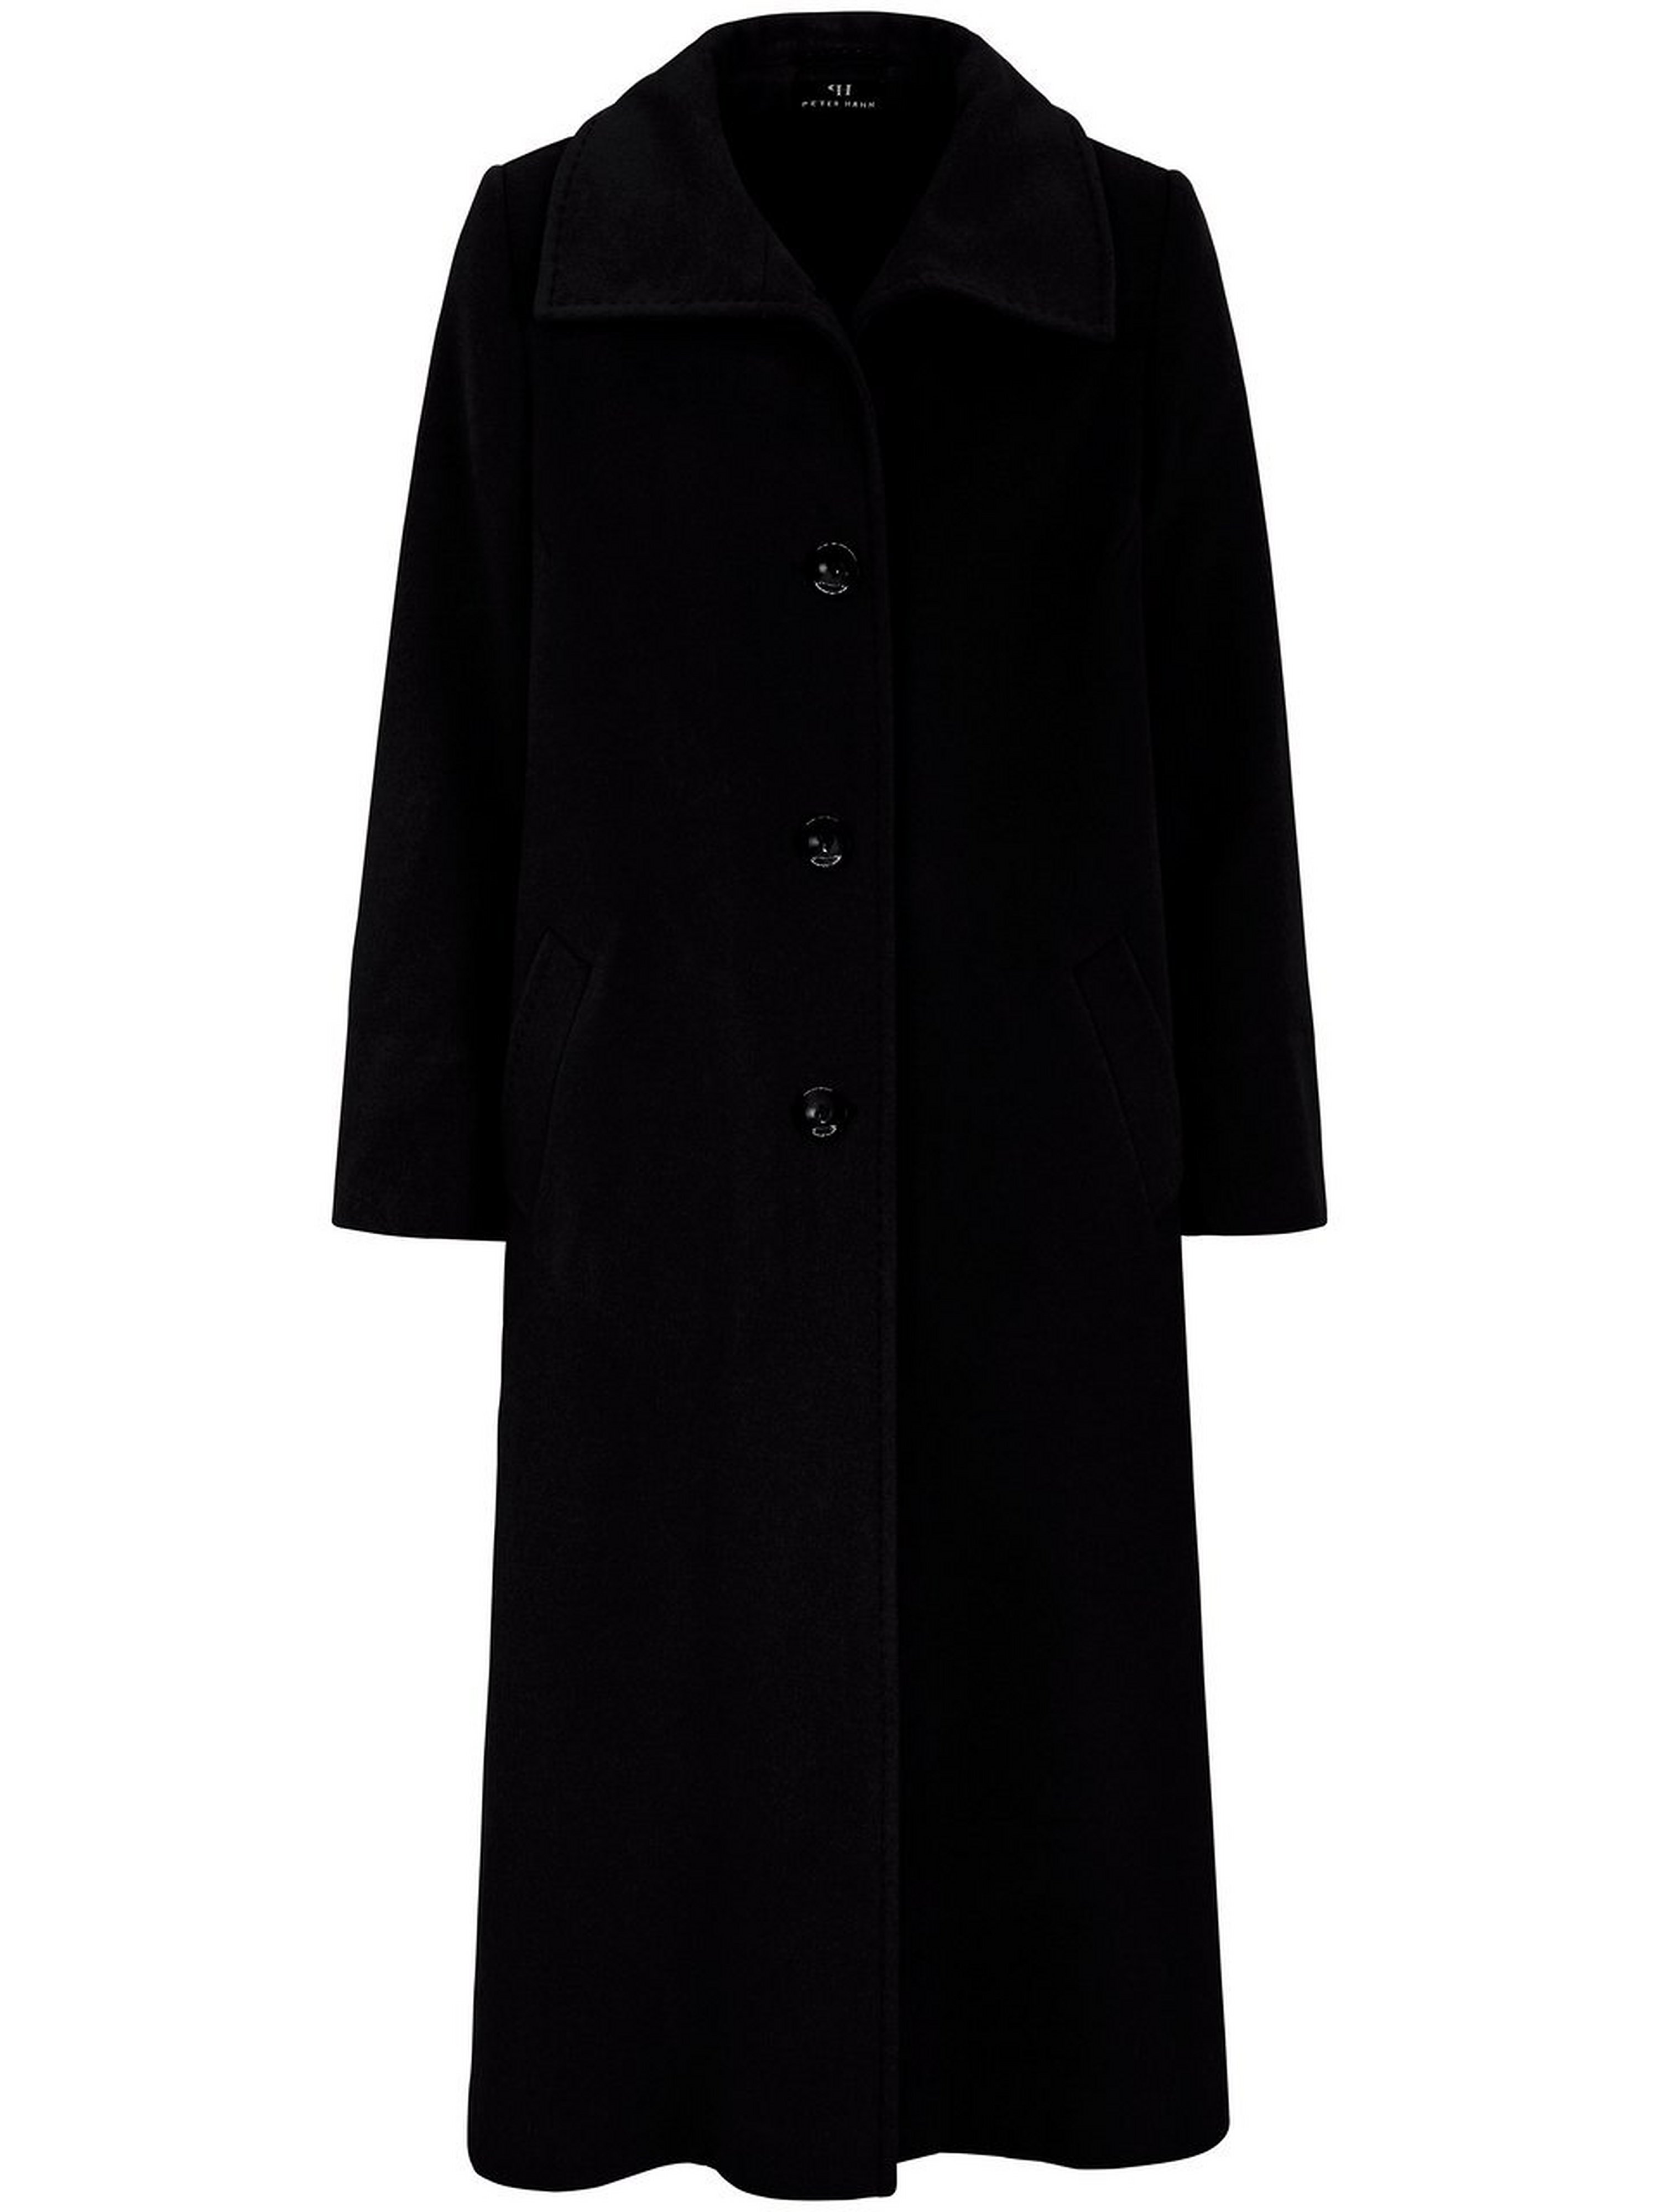 Coat in a slightly flared A line Peter Hahn black